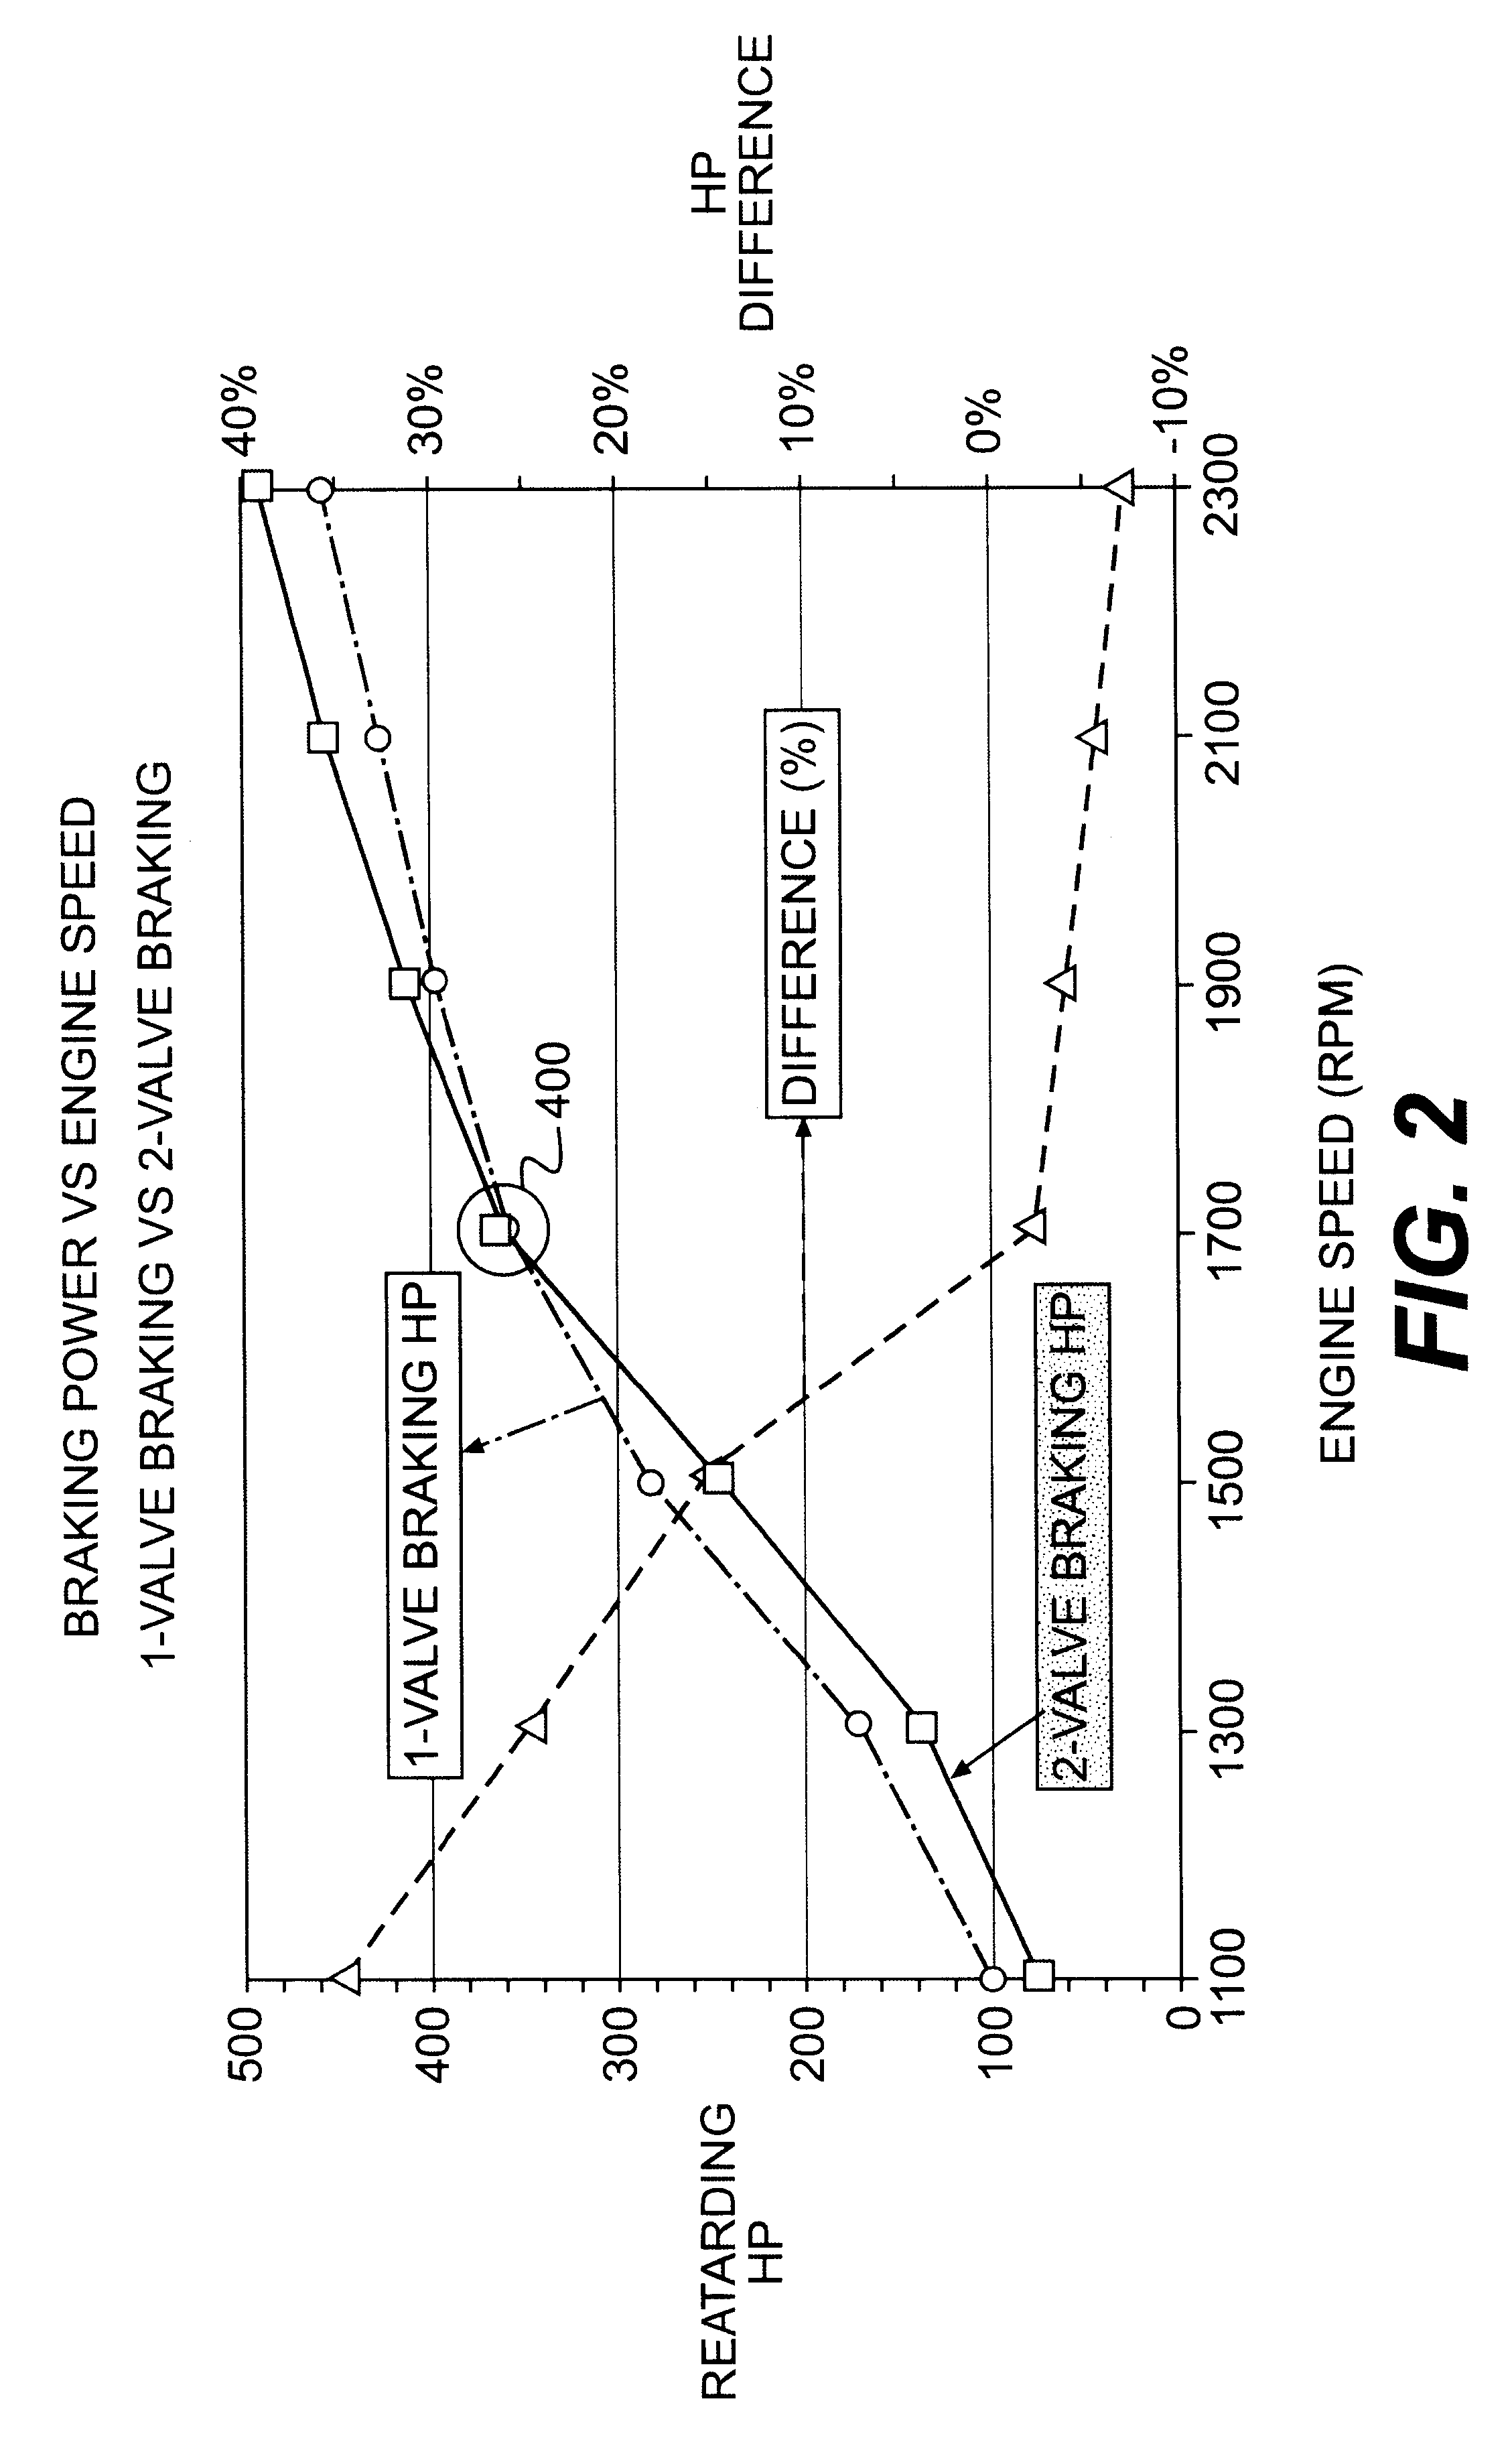 Method and system of improving engine braking by variable valve actuation